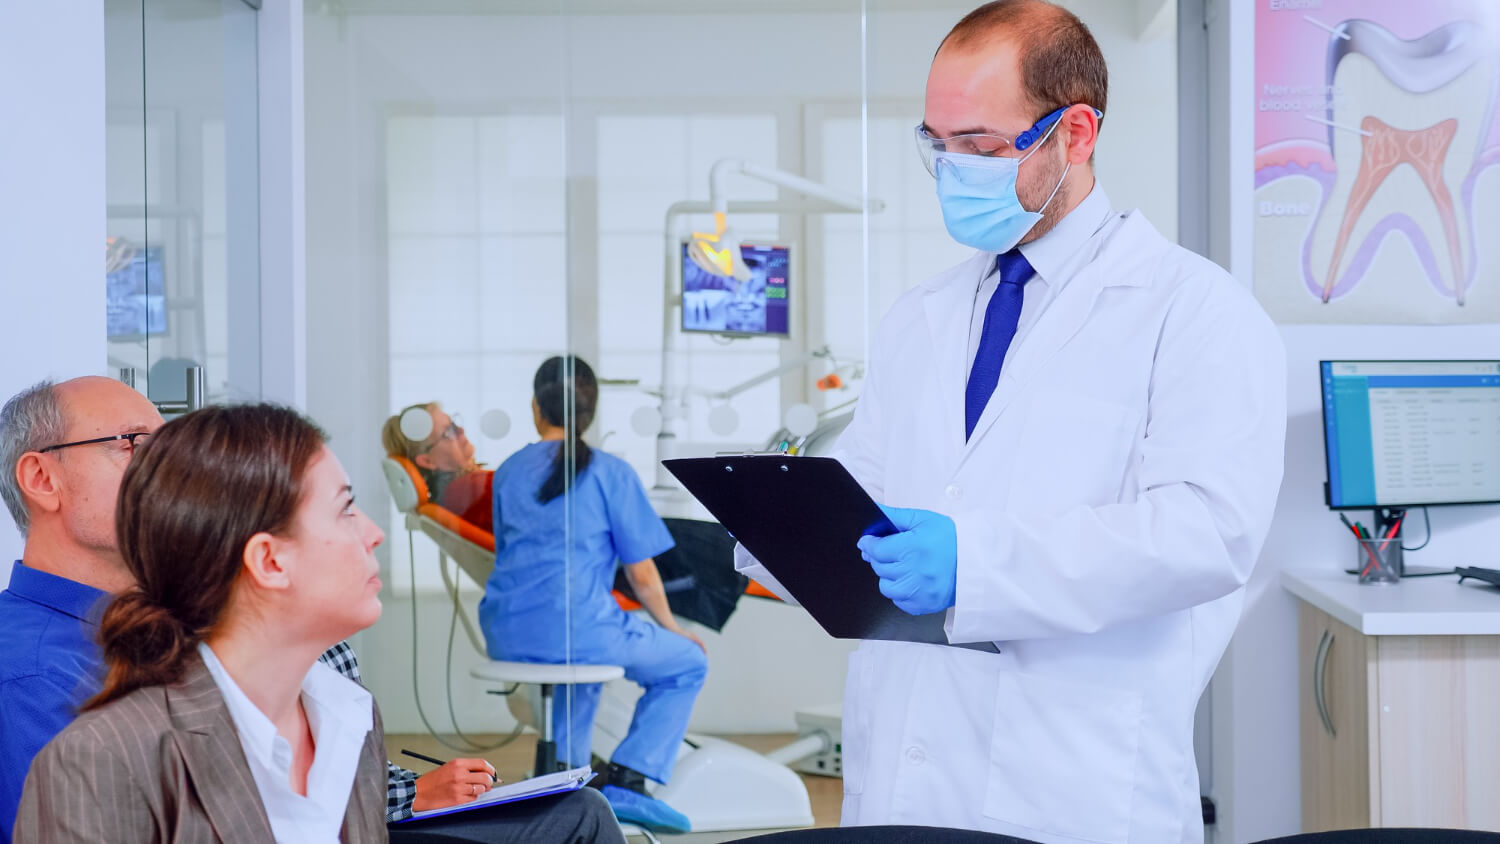 A dentist carefully-reviews with the wife of the man receiving dental care via a dental assistant in the dental room in the background his current dental situation and what treatment options are available; the dentist takes care to follow dental office HIPAA compliance best practices while sharing such patient data.